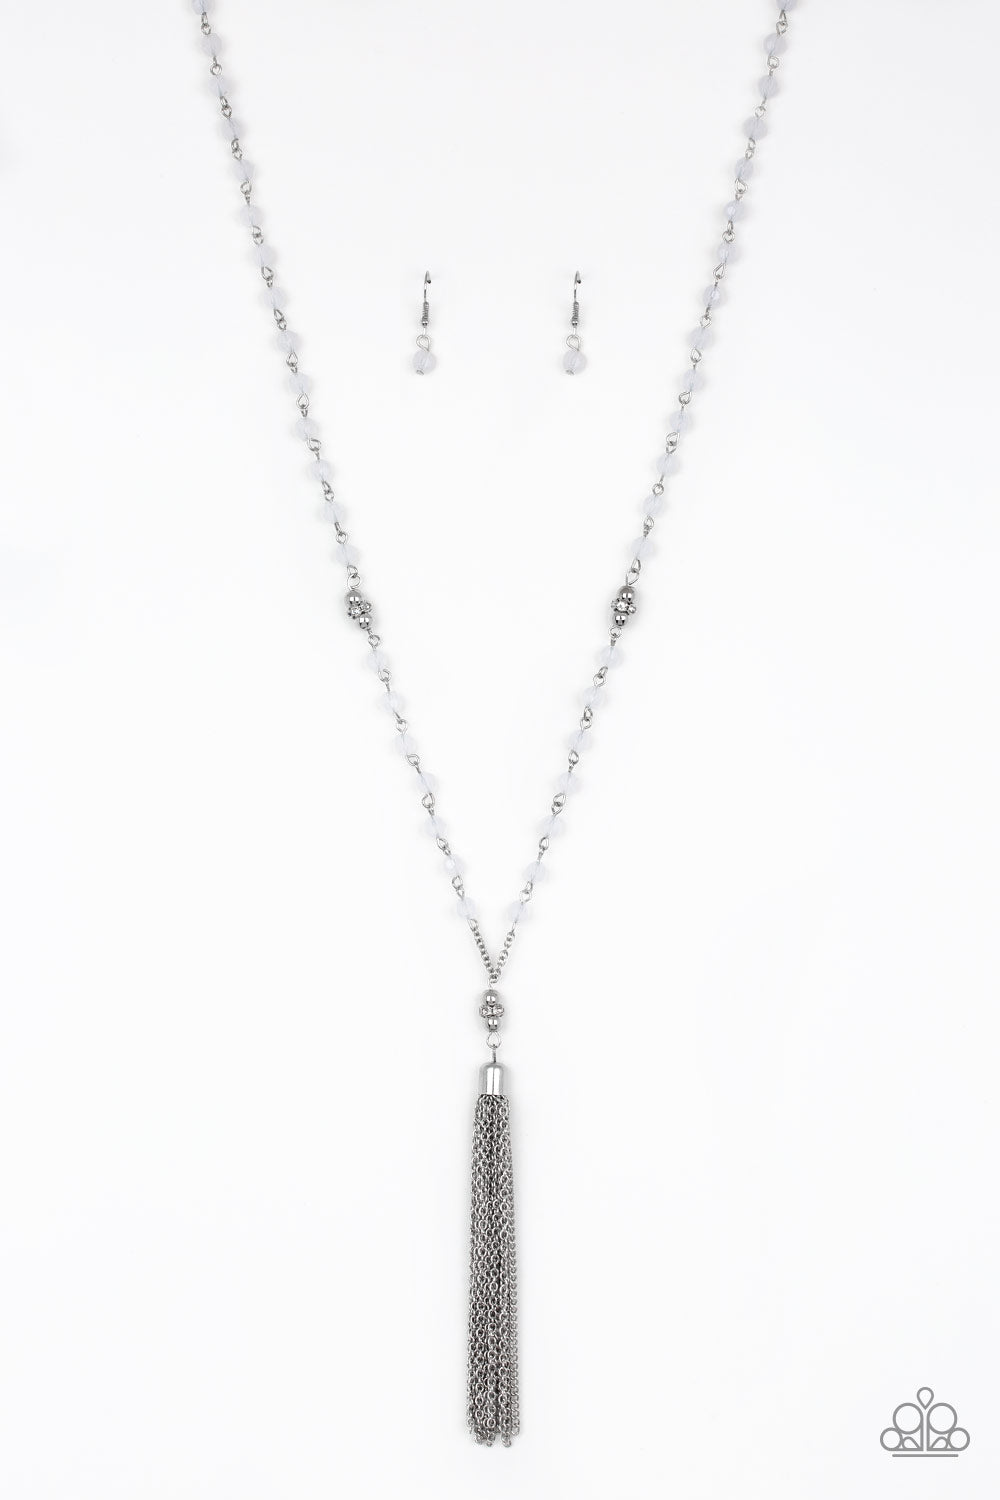 Paparazzi Tassel Takeover White Long Necklace